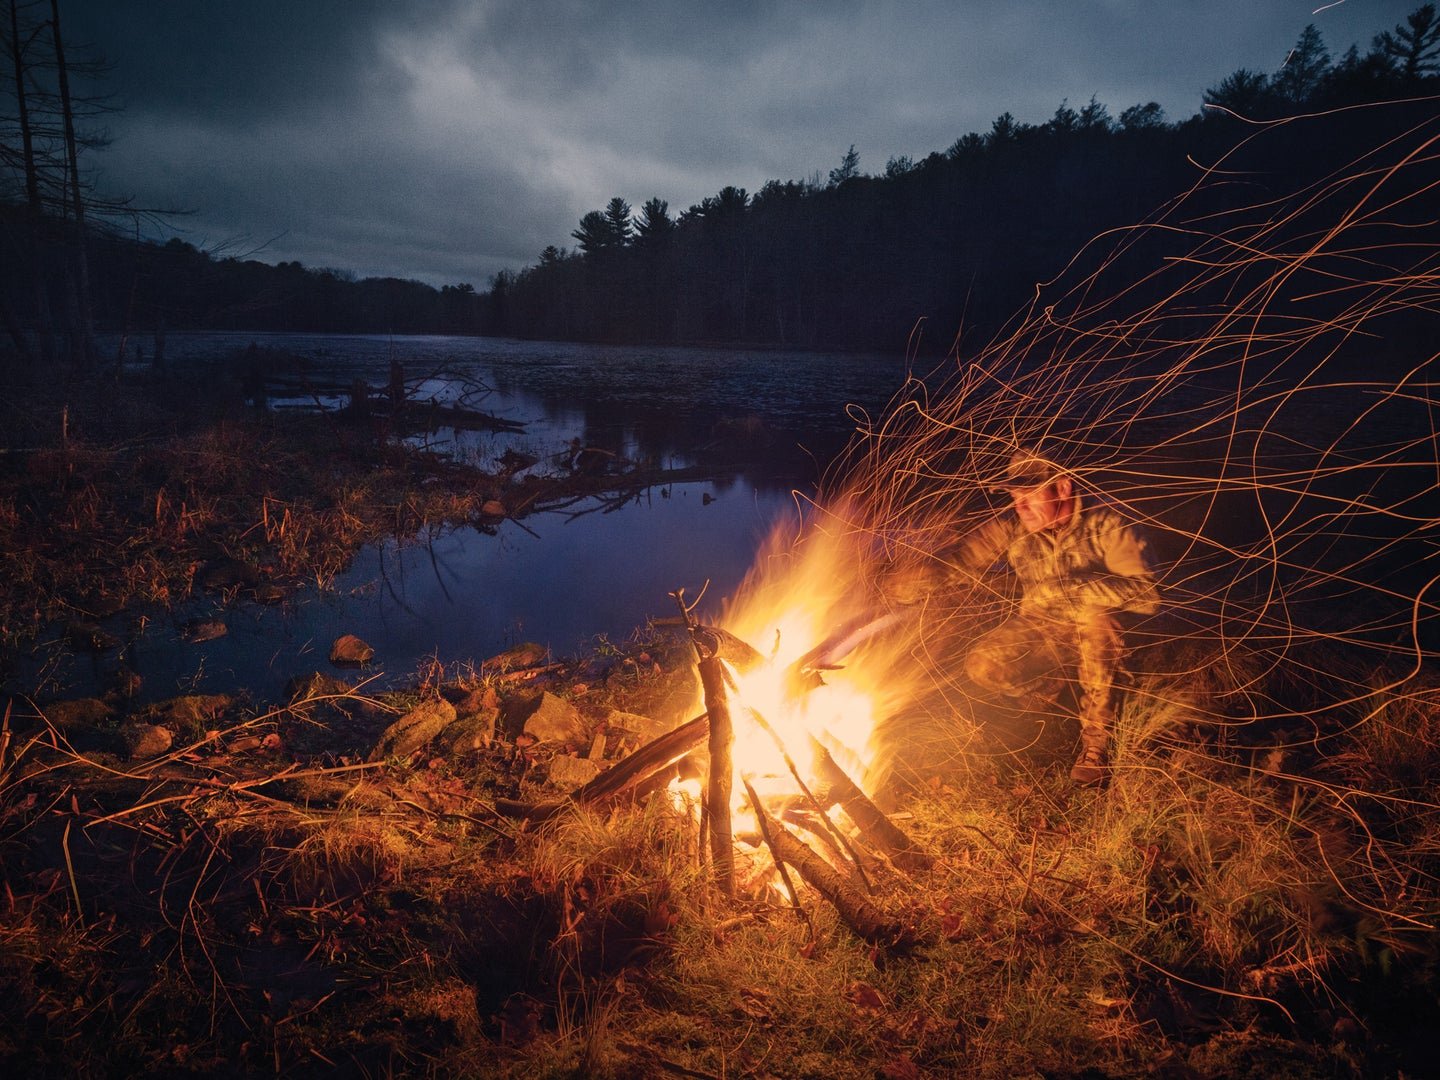 How to build the ultimate campfire